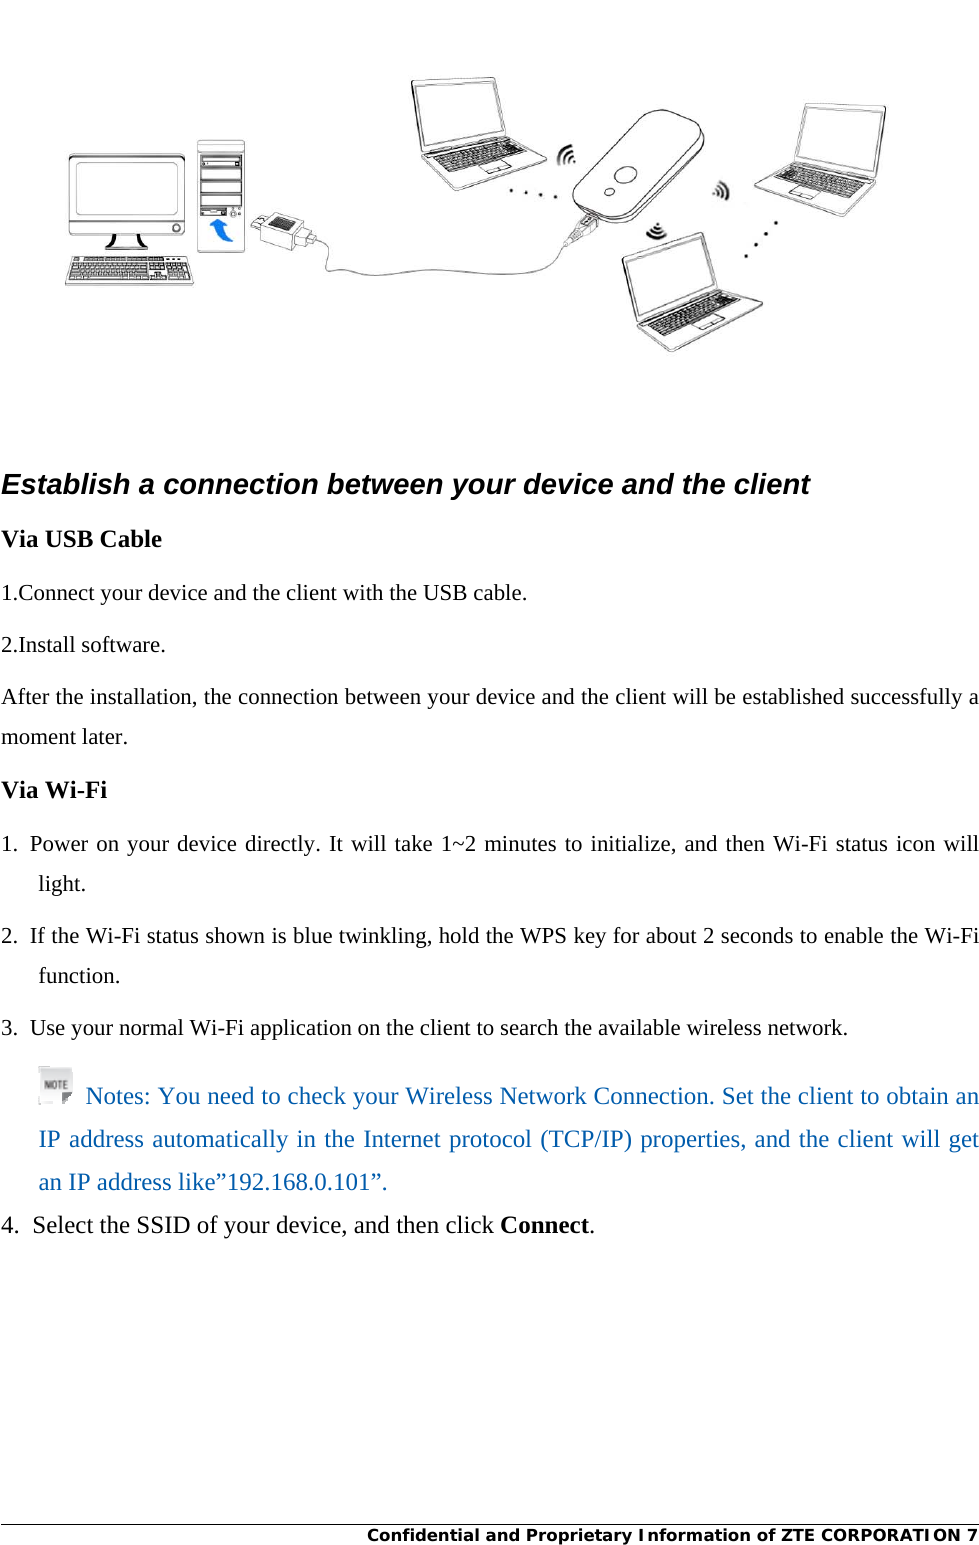    Confidential and Proprietary Information of ZTE CORPORATION 7 Establish a connection between your device and the client Via USB Cable 1.Connect your device and the client with the USB cable. 2.Install software. After the installation, the connection between your device and the client will be established successfully a moment later. Via Wi-Fi 1. Power on your device directly. It will take 1~2 minutes to initialize, and then Wi-Fi status icon will light. 2.  If the Wi-Fi status shown is blue twinkling, hold the WPS key for about 2 seconds to enable the Wi-Fi function. 3.  Use your normal Wi-Fi application on the client to search the available wireless network.   Notes: You need to check your Wireless Network Connection. Set the client to obtain an IP address automatically in the Internet protocol (TCP/IP) properties, and the client will get an IP address like”192.168.0.101”. 4.  Select the SSID of your device, and then click Connect. 